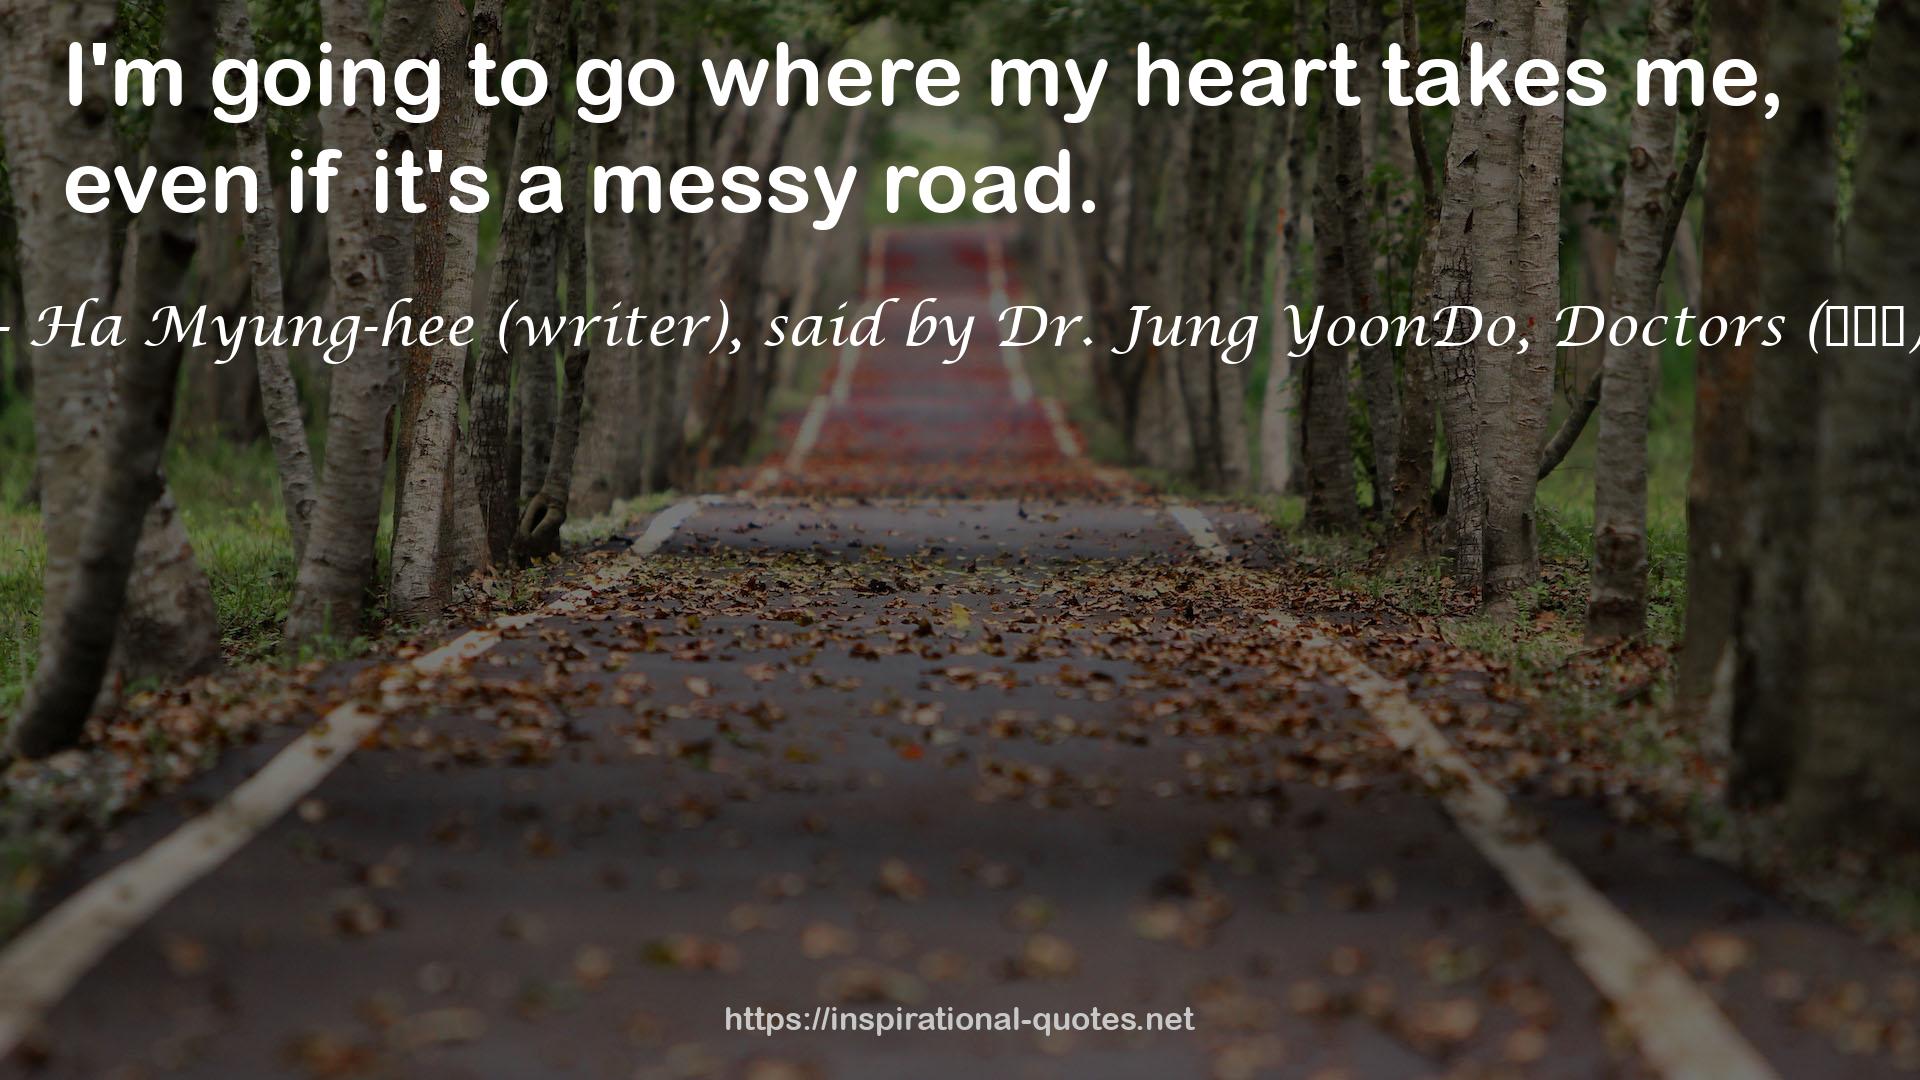 Ha Myung-hee (writer), said by Dr. Jung YoonDo, Doctors (닥터스) QUOTES